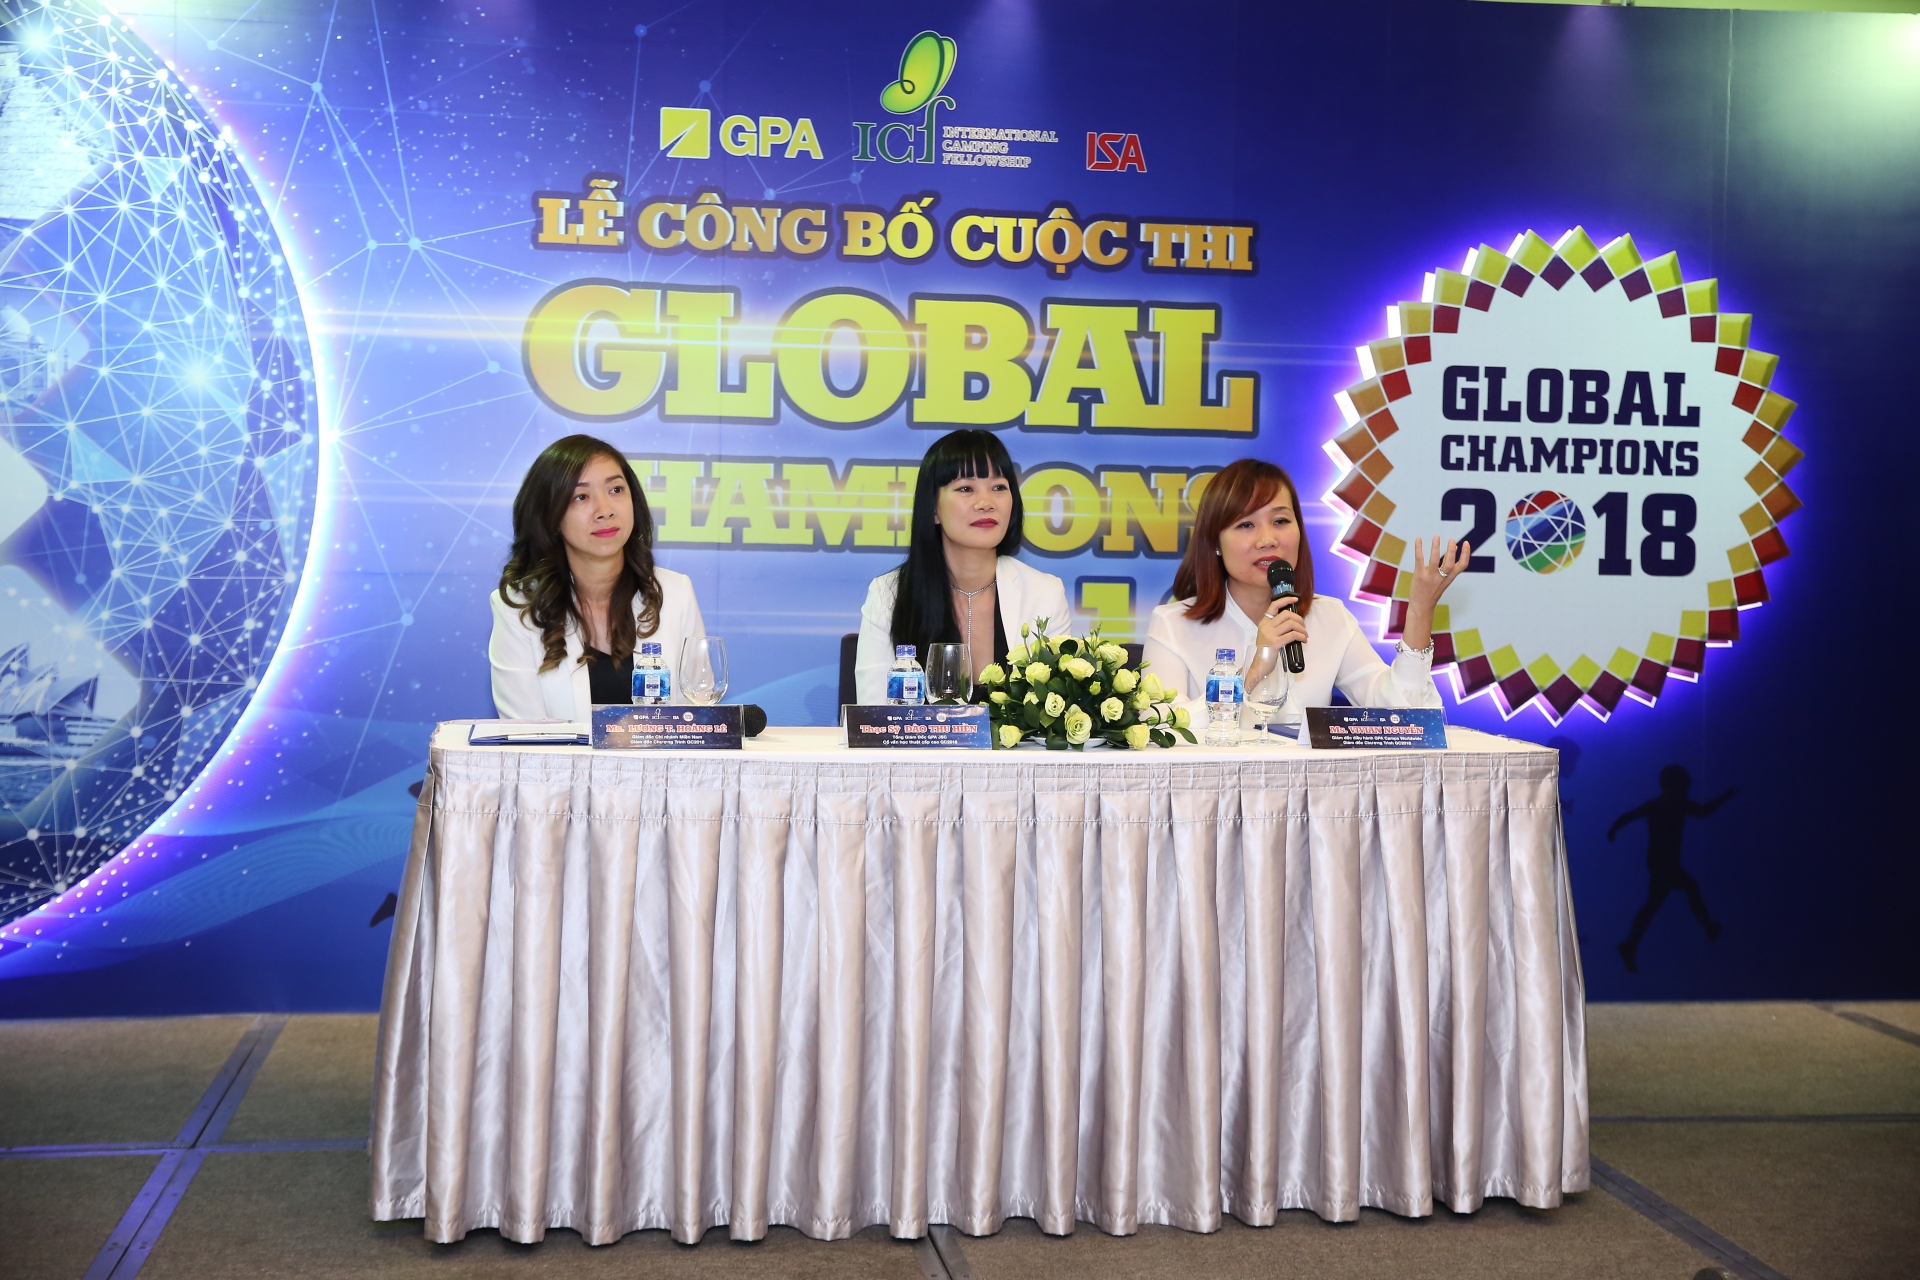 Global Champions 2018 opens for young English language learners